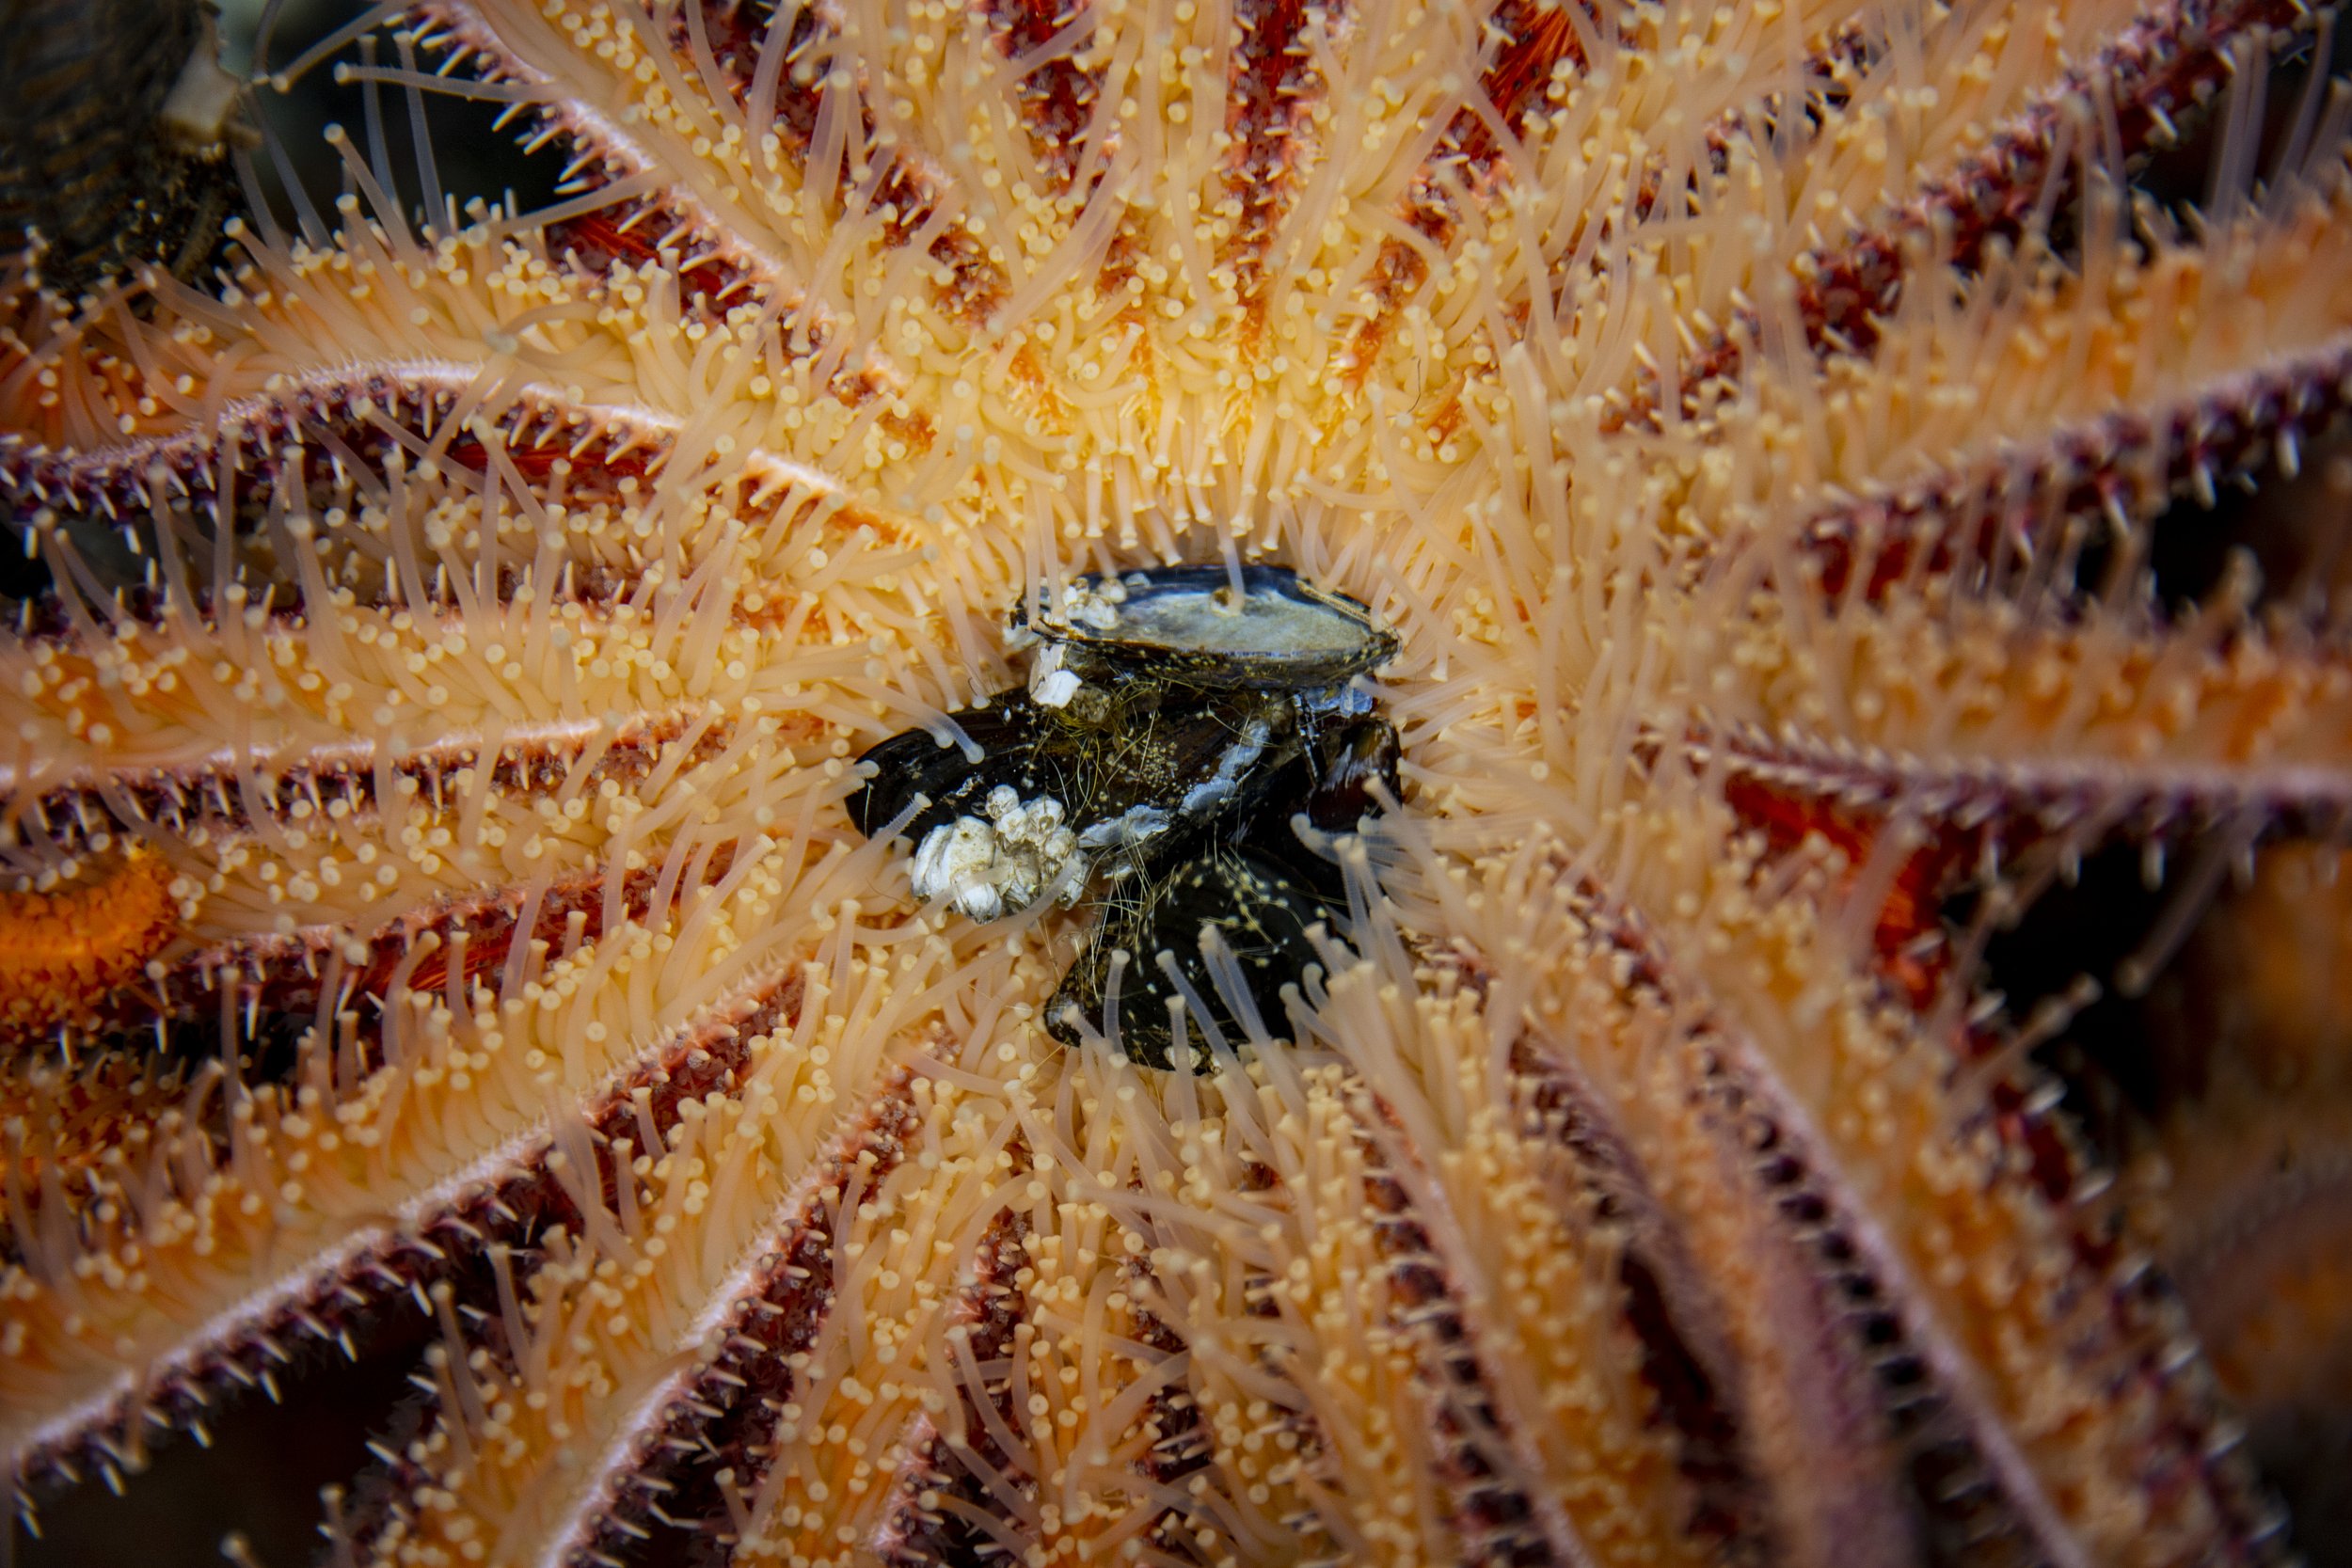   The underside of an adult sunflower sea star feeding on mussels at UW Friday Harbor Laboratories. The sunflower sea star captive breeding program is a partnership between University of Washington and The Nature Conservancy. // Dennis Wise - Univers